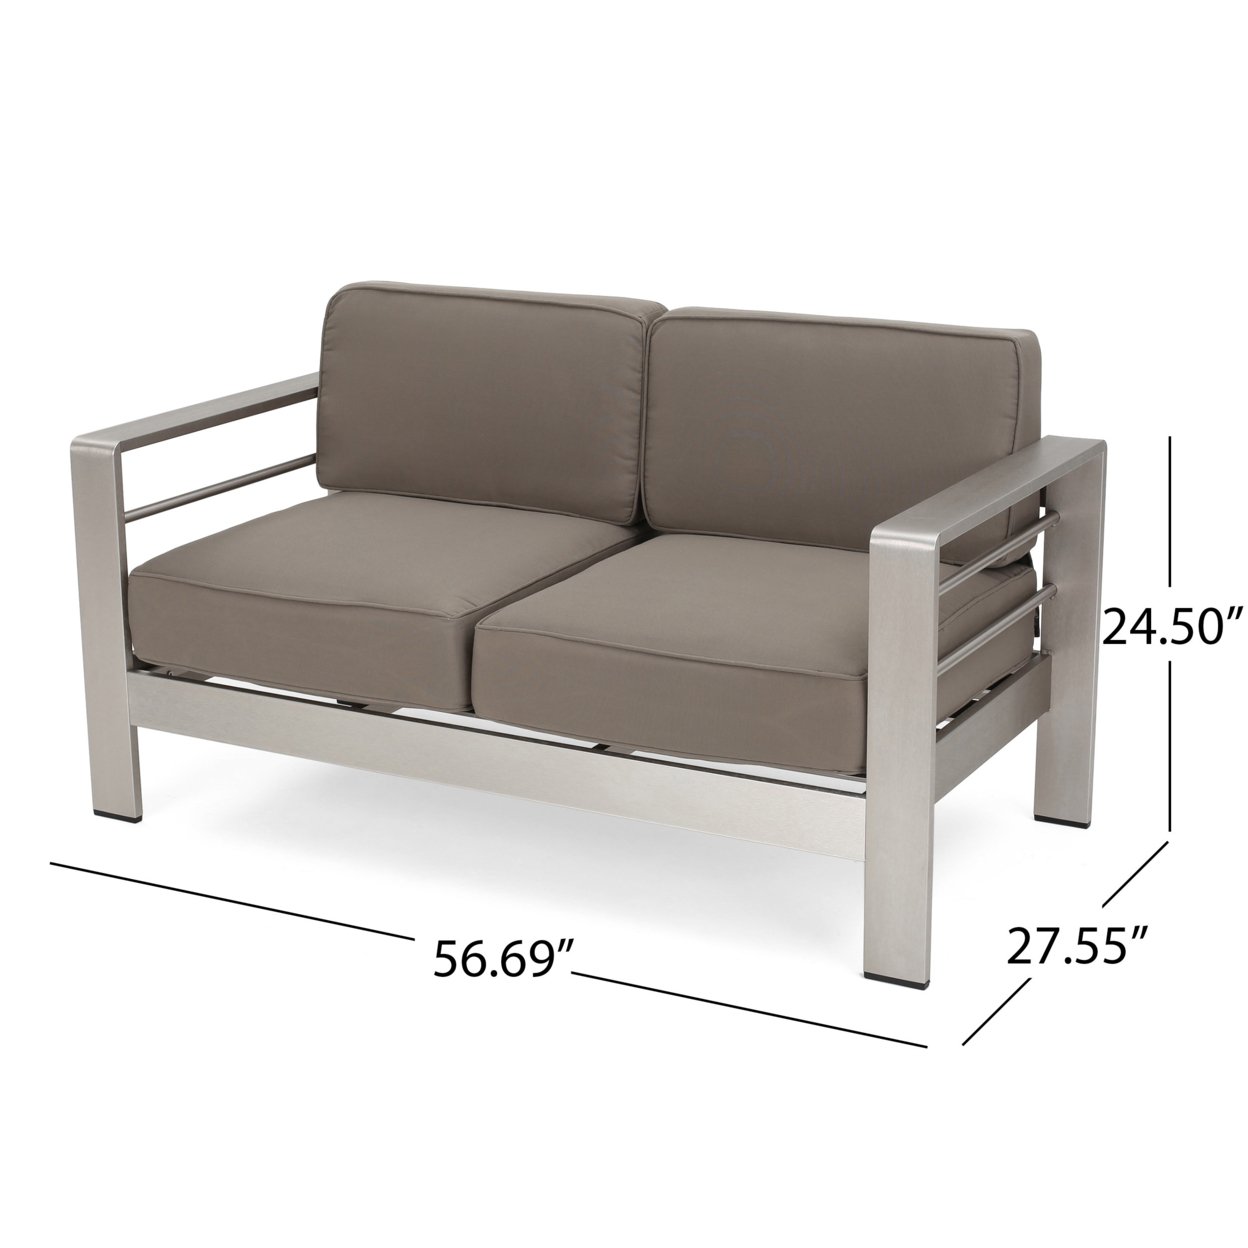 Cape Coral Outdoor 7-Seater Aluminum Patio Sofa Set With Coffee Table, Silver And Khaki